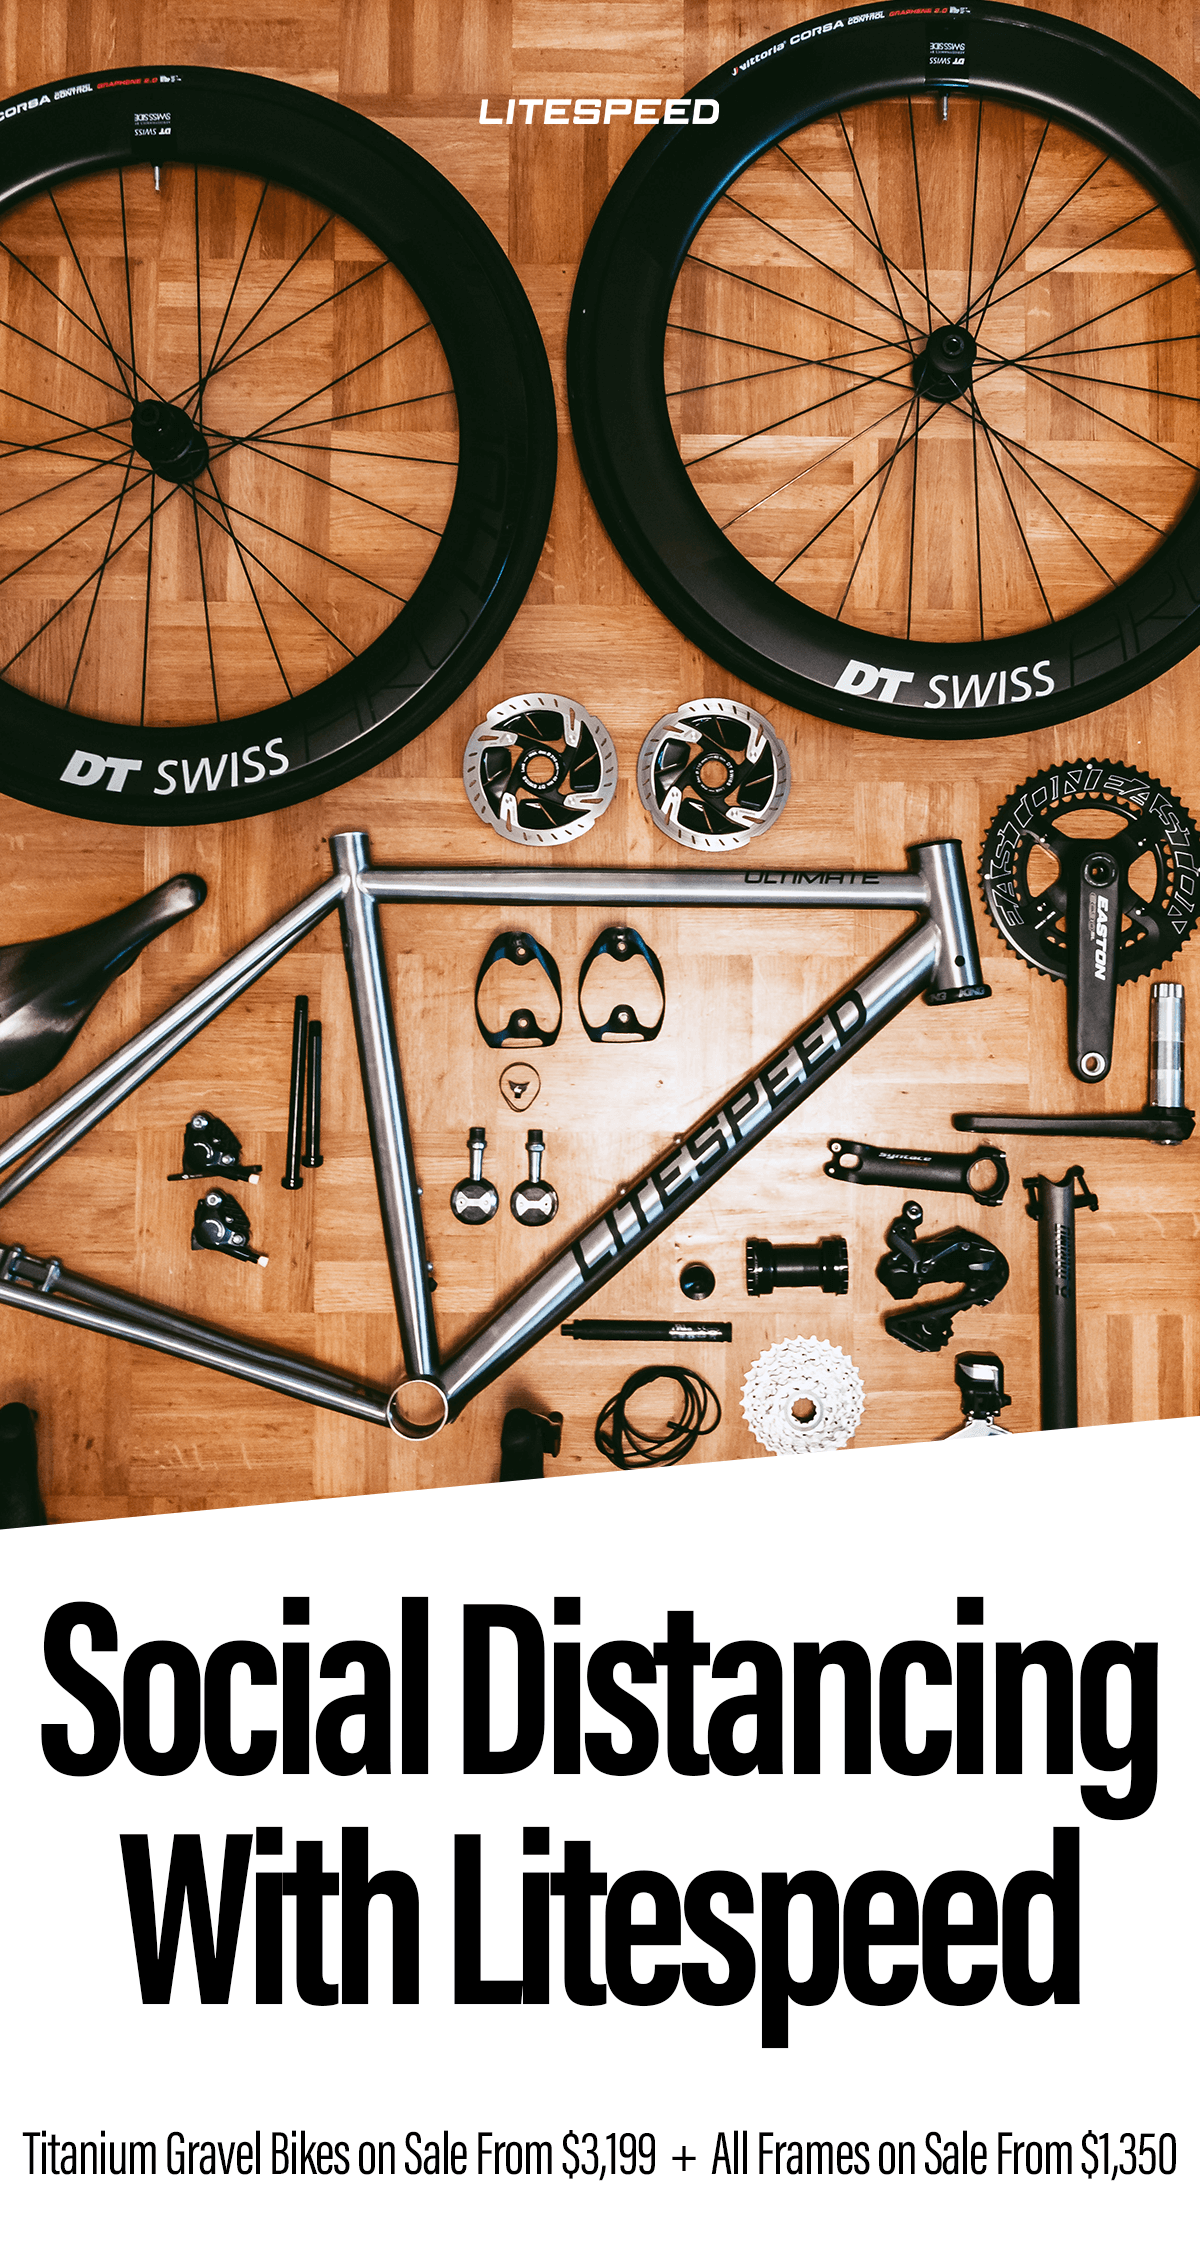 Social Distancing with Litespeed. The Spring Sale is on, with gravel bikes from $3,199 and all frames from $1,350.